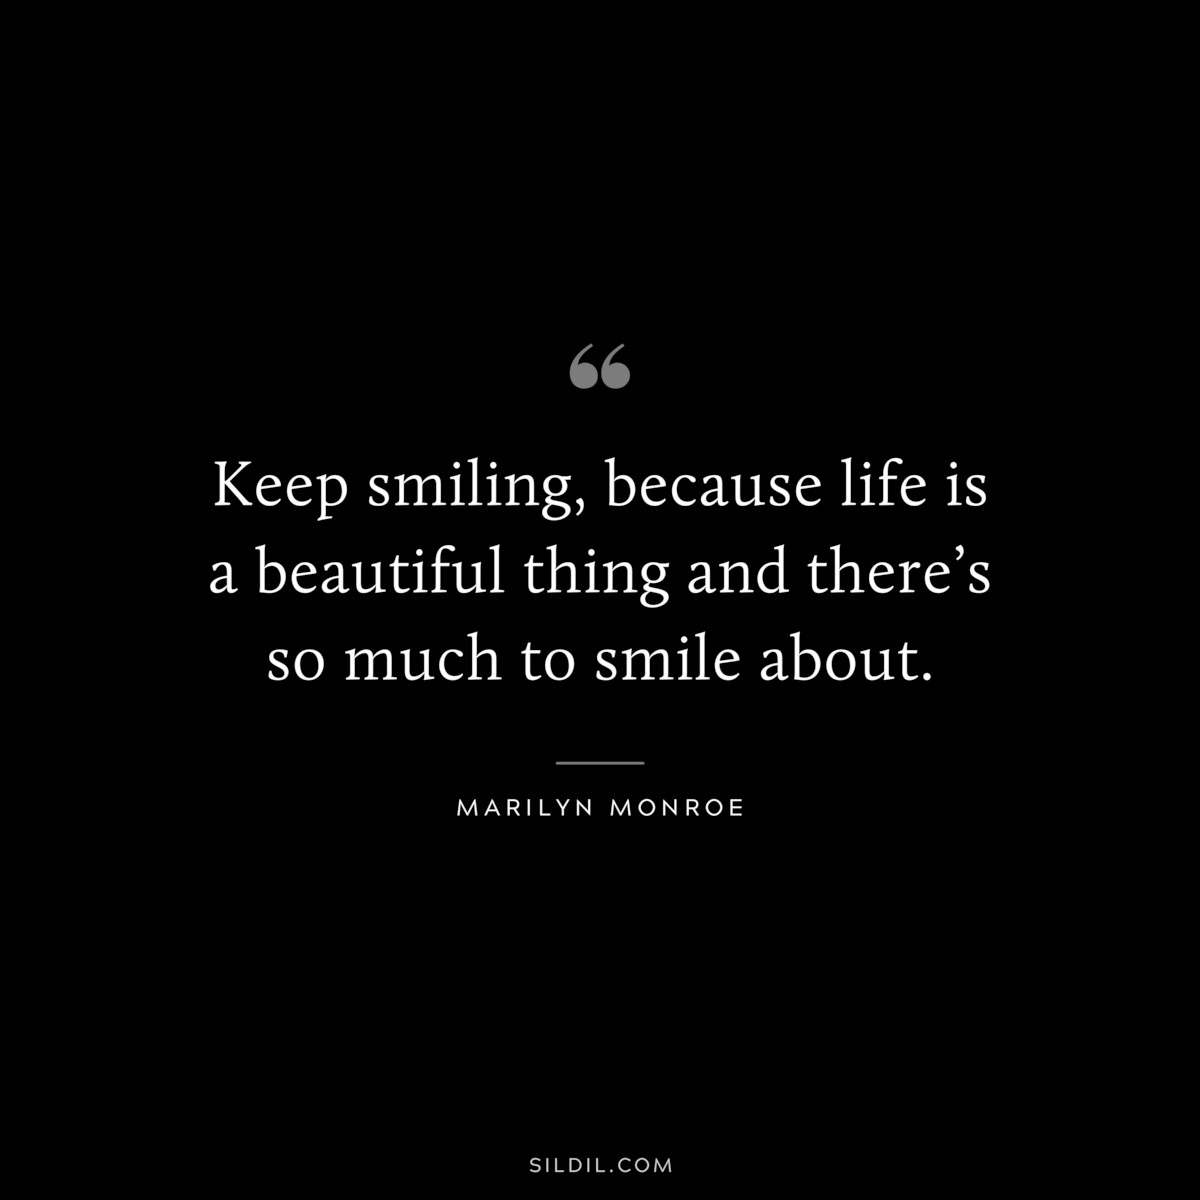 Keep smiling, because life is a beautiful thing and there’s so much to smile about. ― Marilyn Monroe